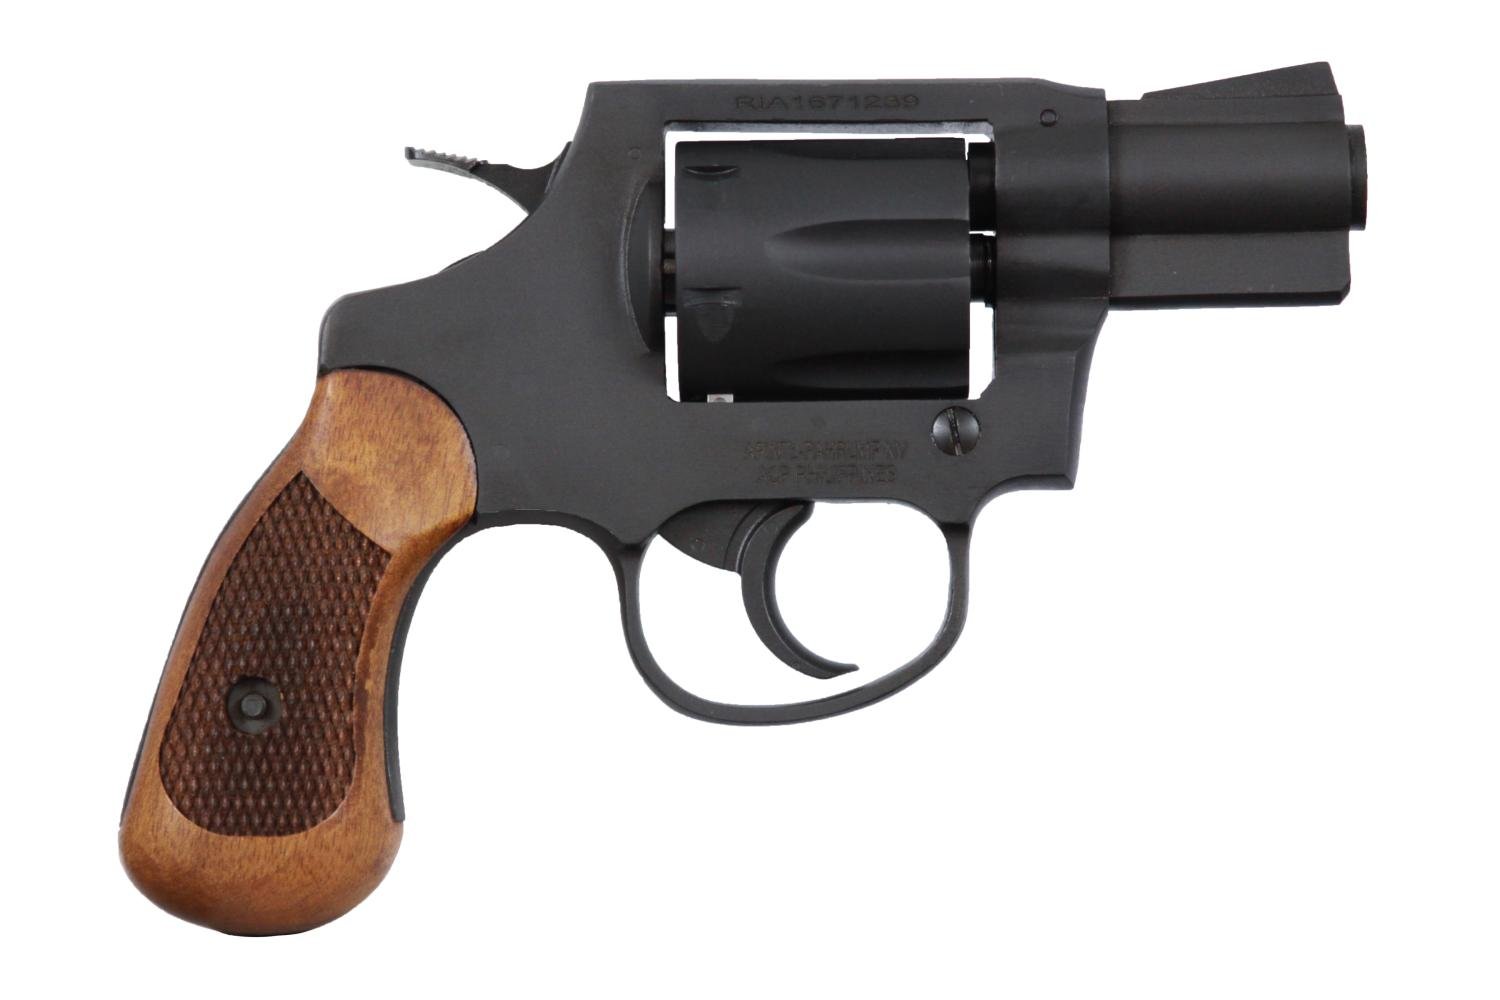 Rock Island Armory M206 .38 Special Subcompact Revolver 6 Rounds - $236.99 